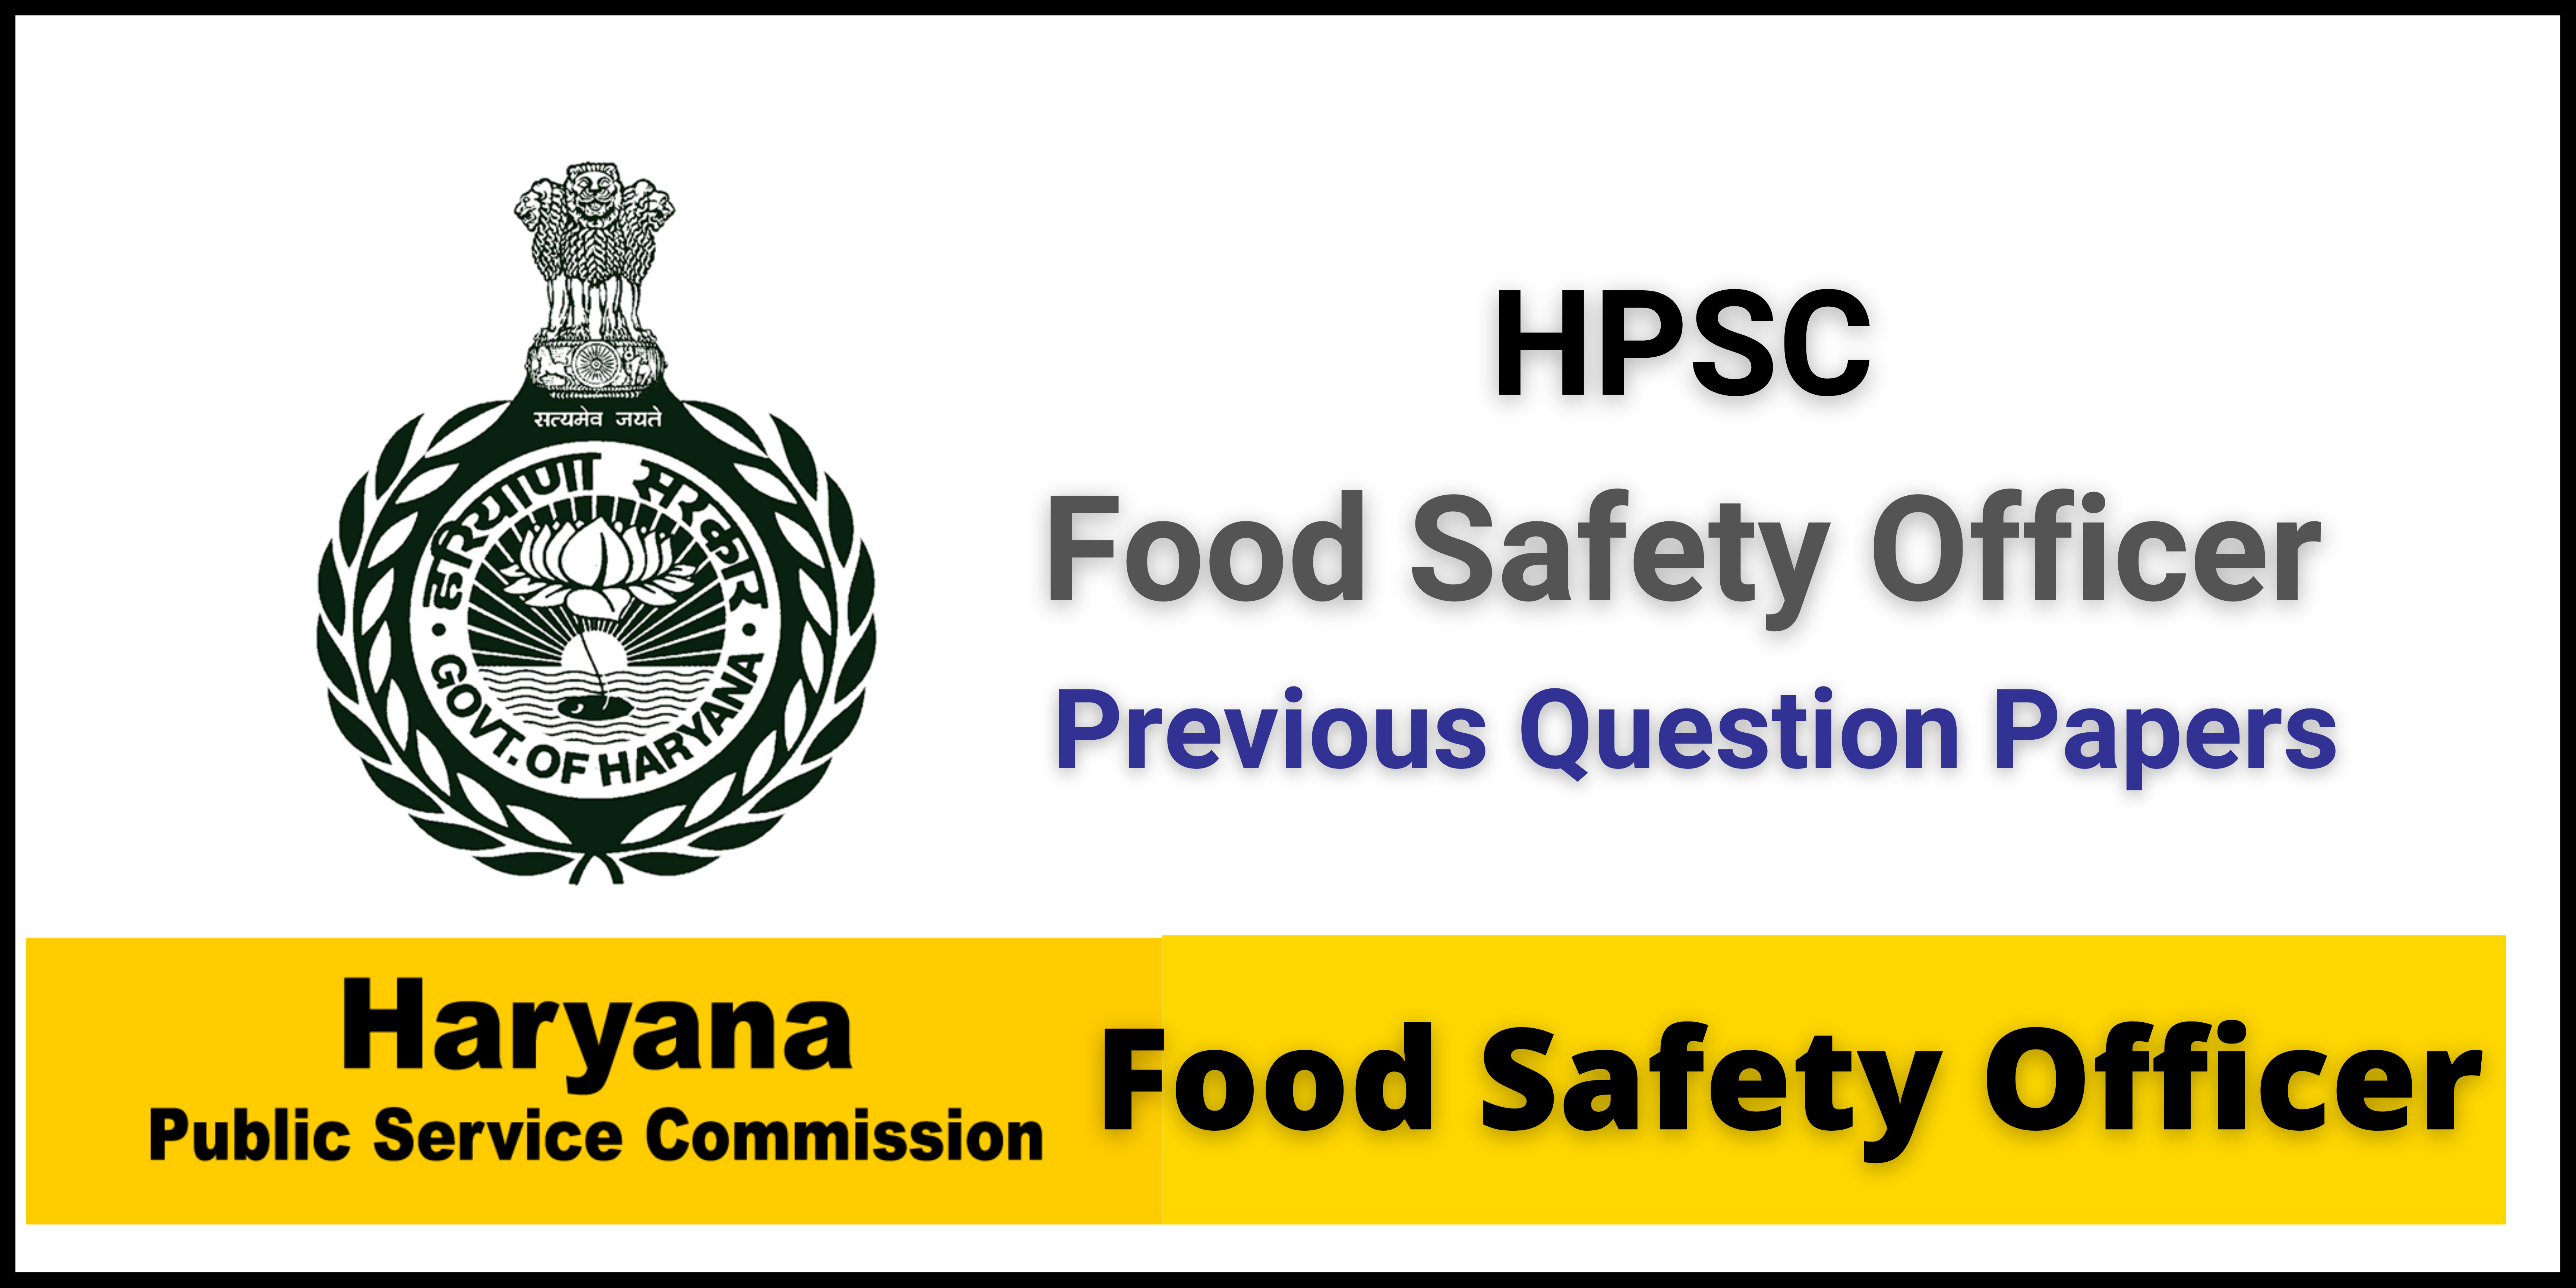 HPSC Food Safety Officer (FSO) Previous Question Papers